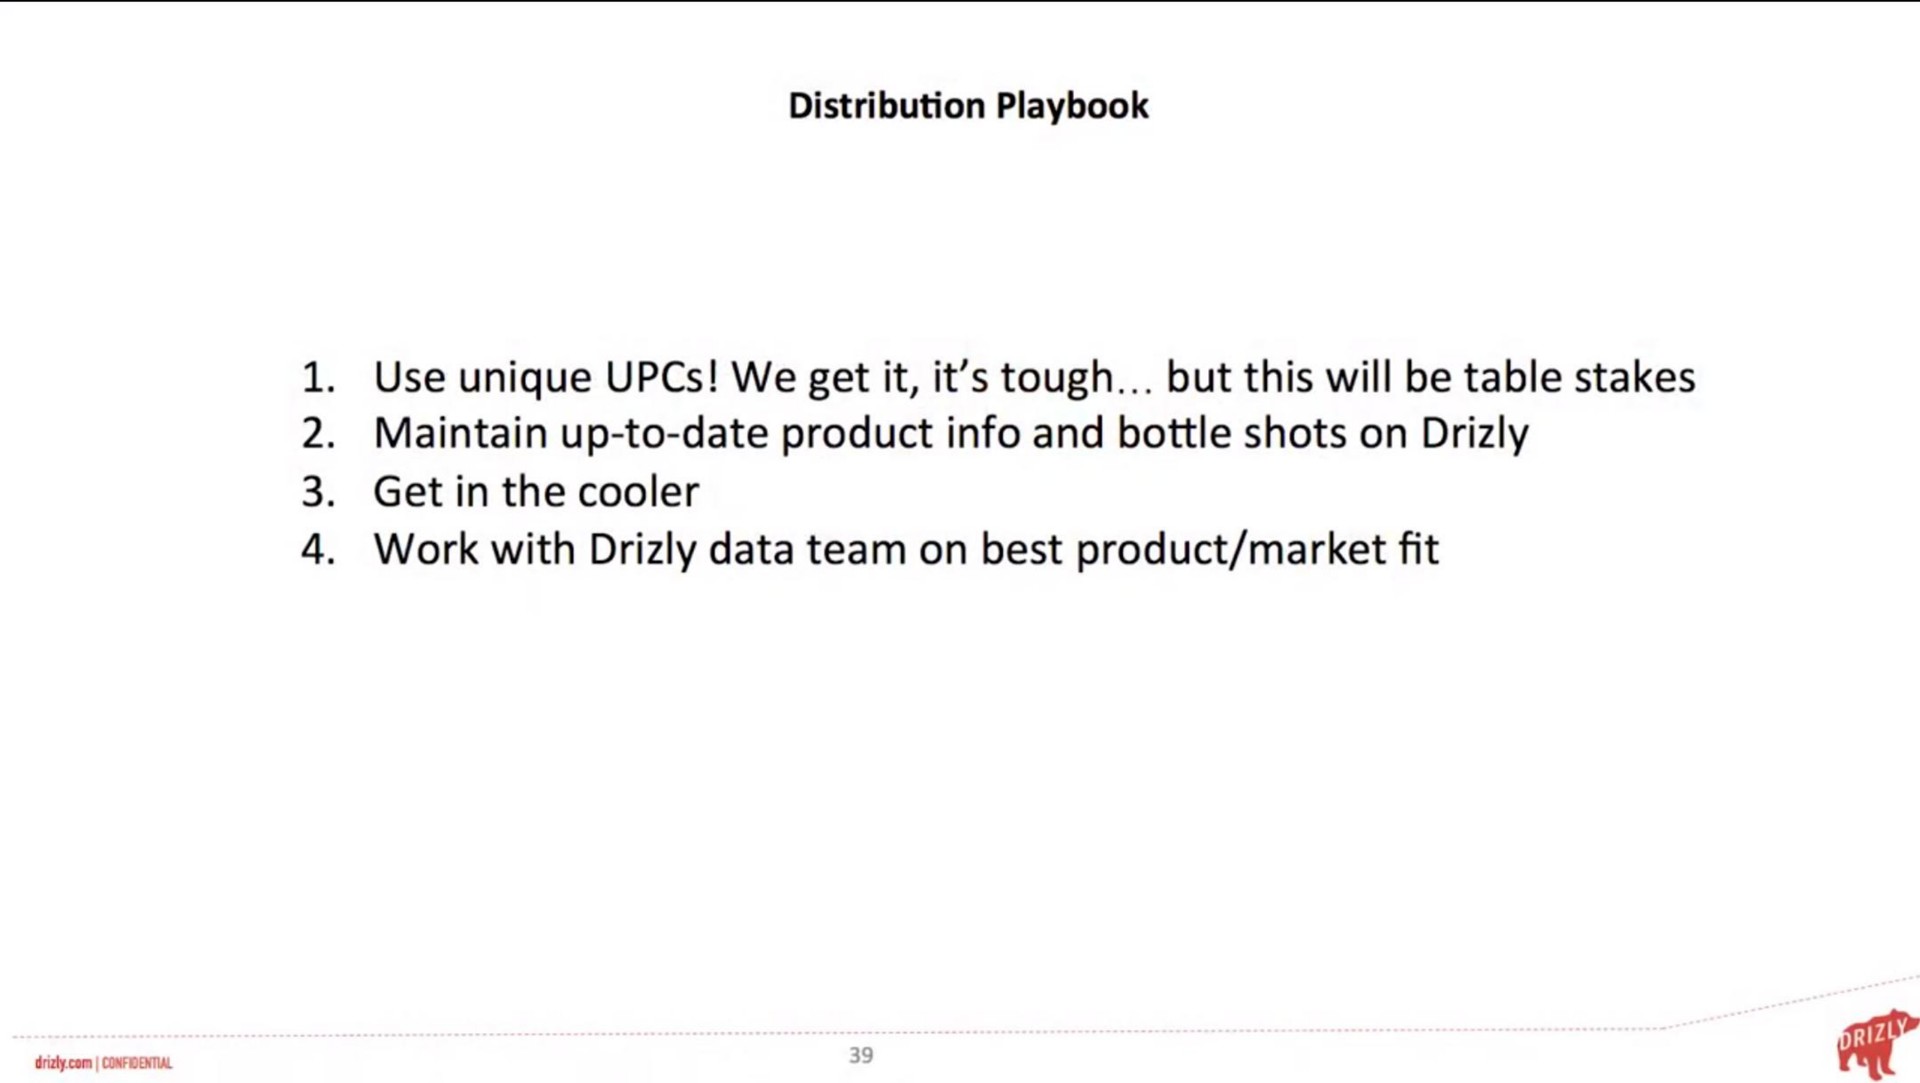 distribution playbook use unique we get it it tough but this will be table stakes maintain up to date product and bottle shots on get in the cooler work with data team on best product market fit | Drizly